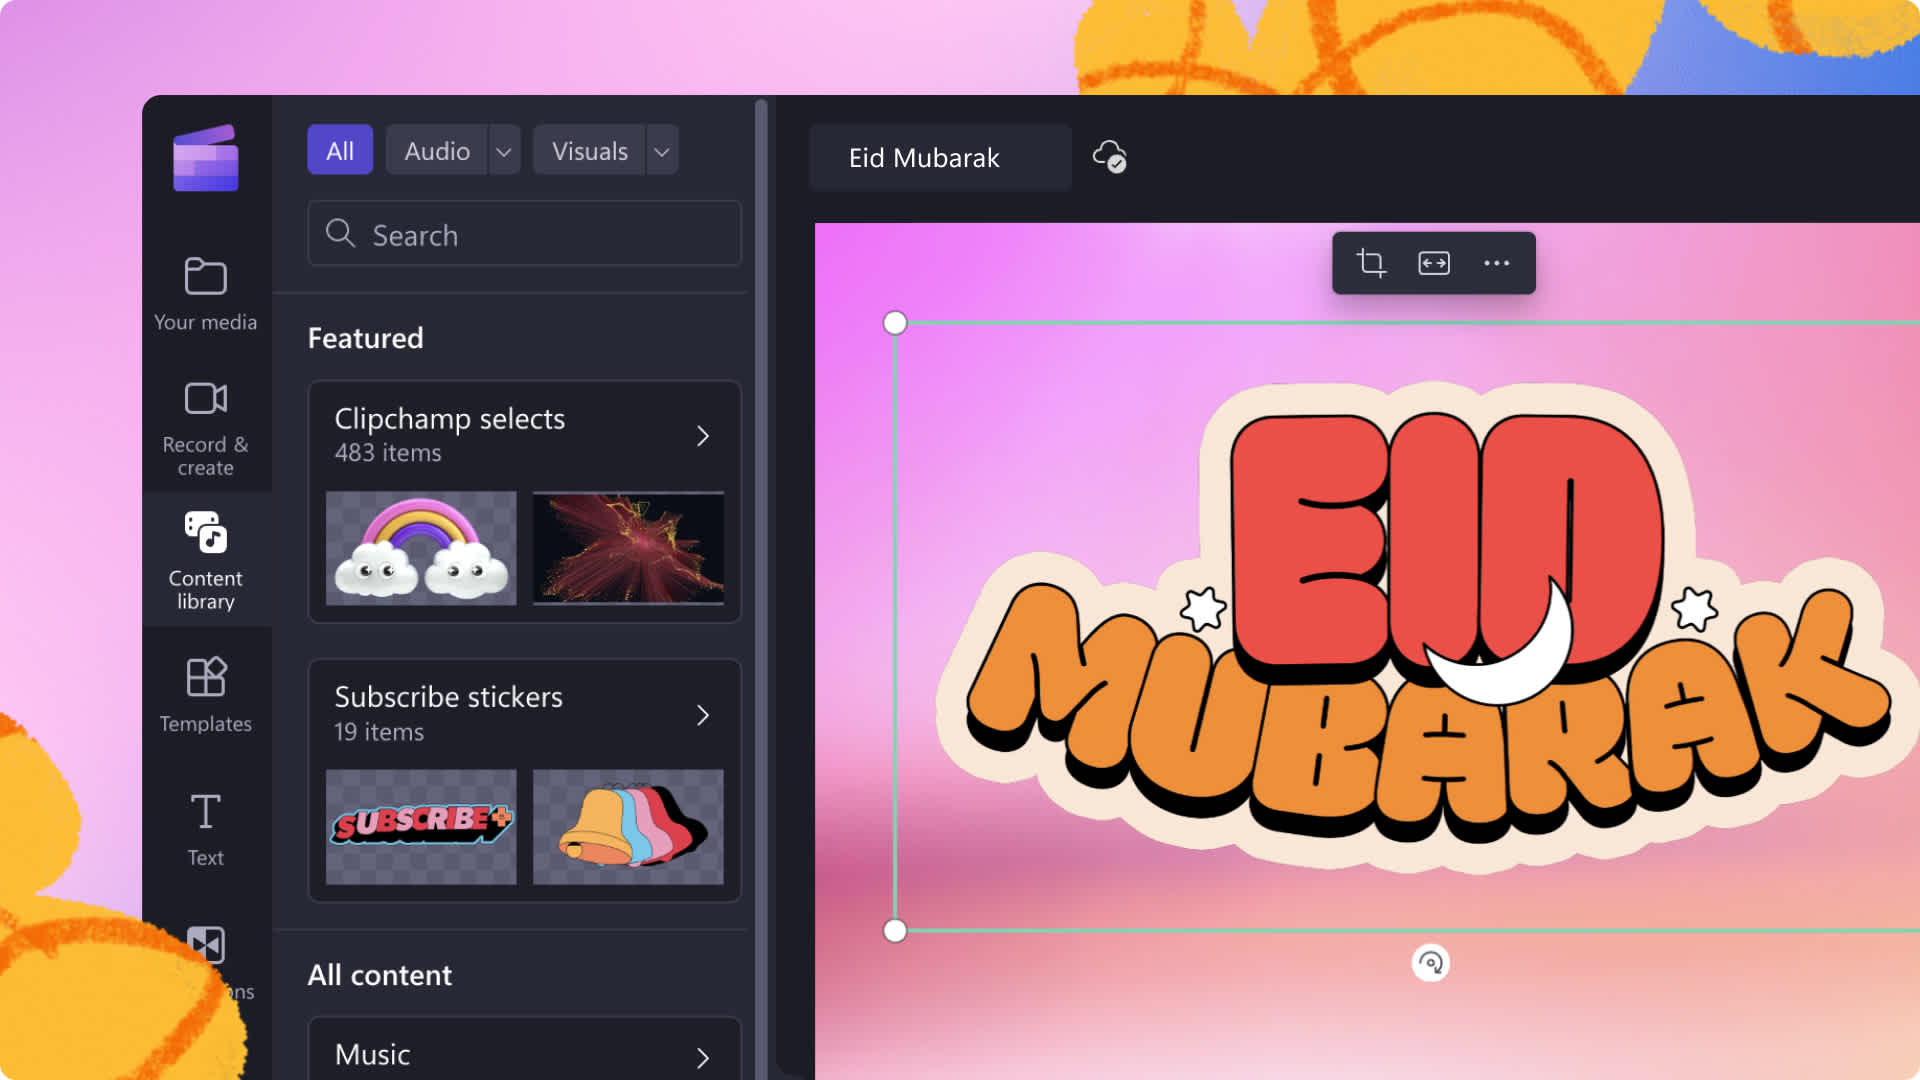 Making a Eid greeting video in Clipchamp using colorful backgrounds and stickers